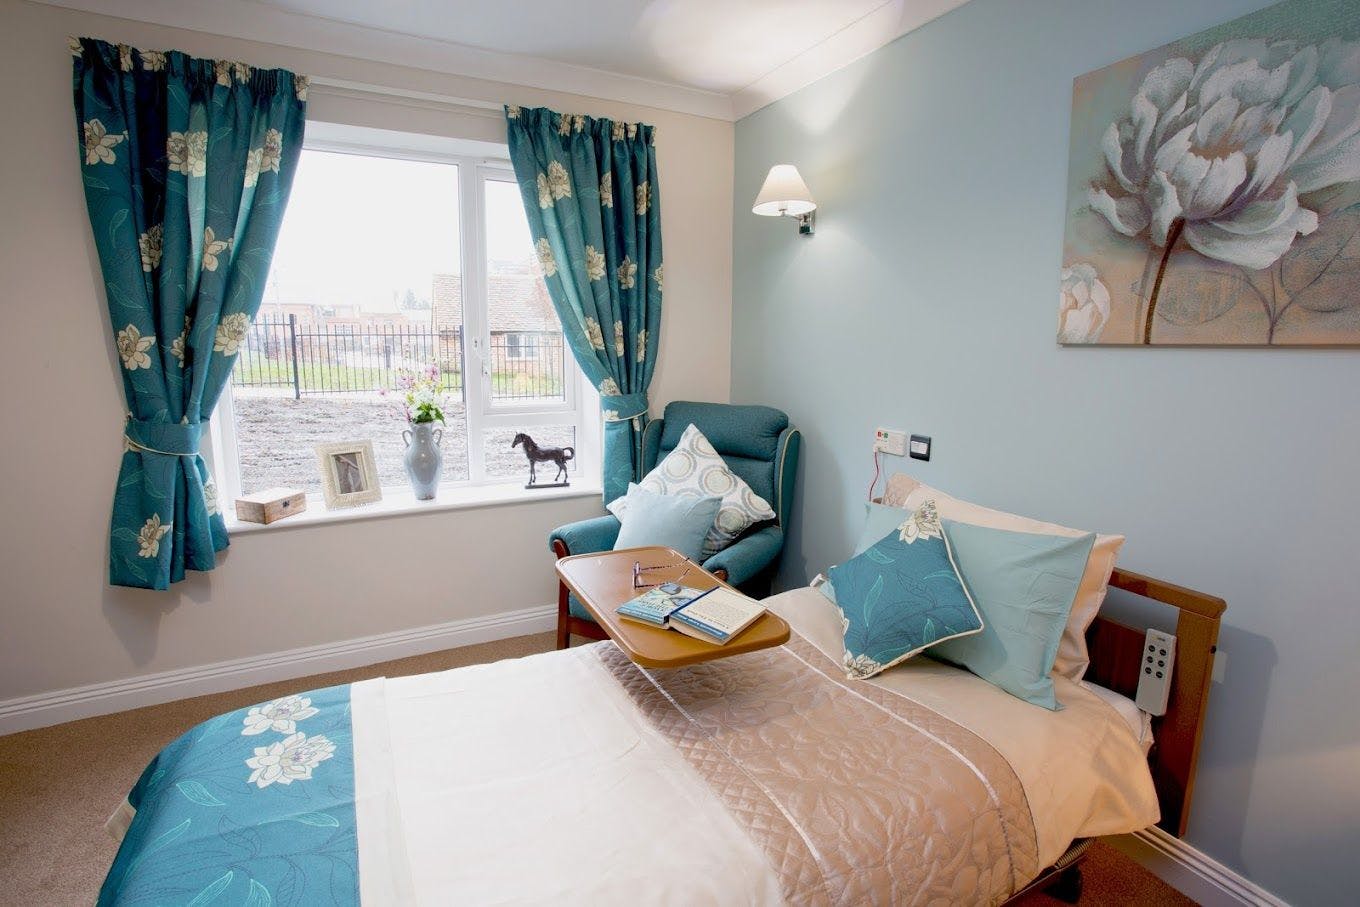 Bedroom at Chilterns Court Care Home in Henley-on-Thames, Oxfordshire